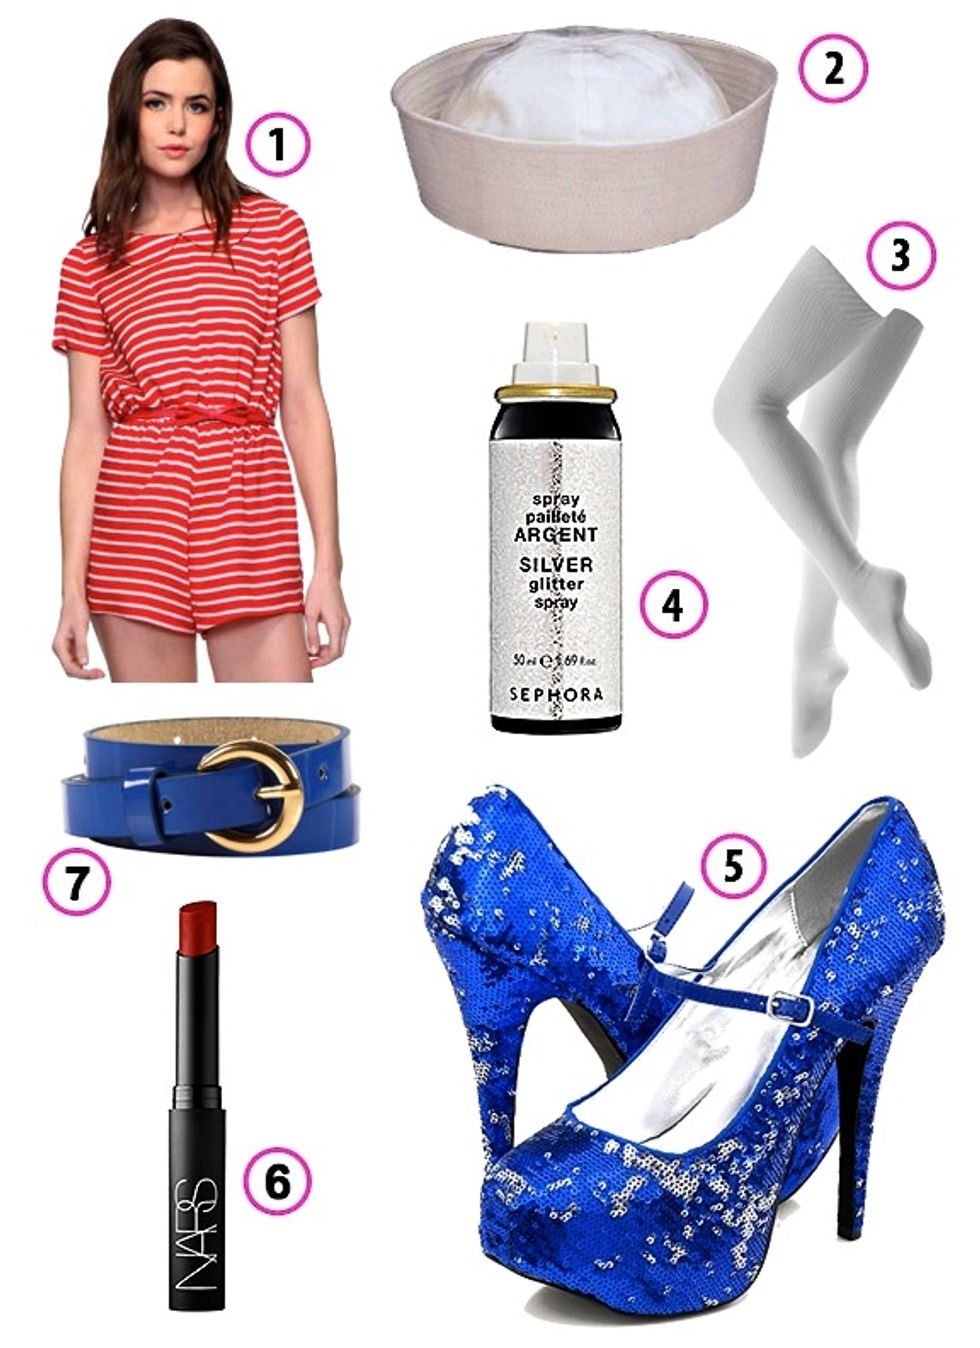 Look of the Week: Snappy Sailor for Bay to Breakers 100th Annual Celebration this Sunday